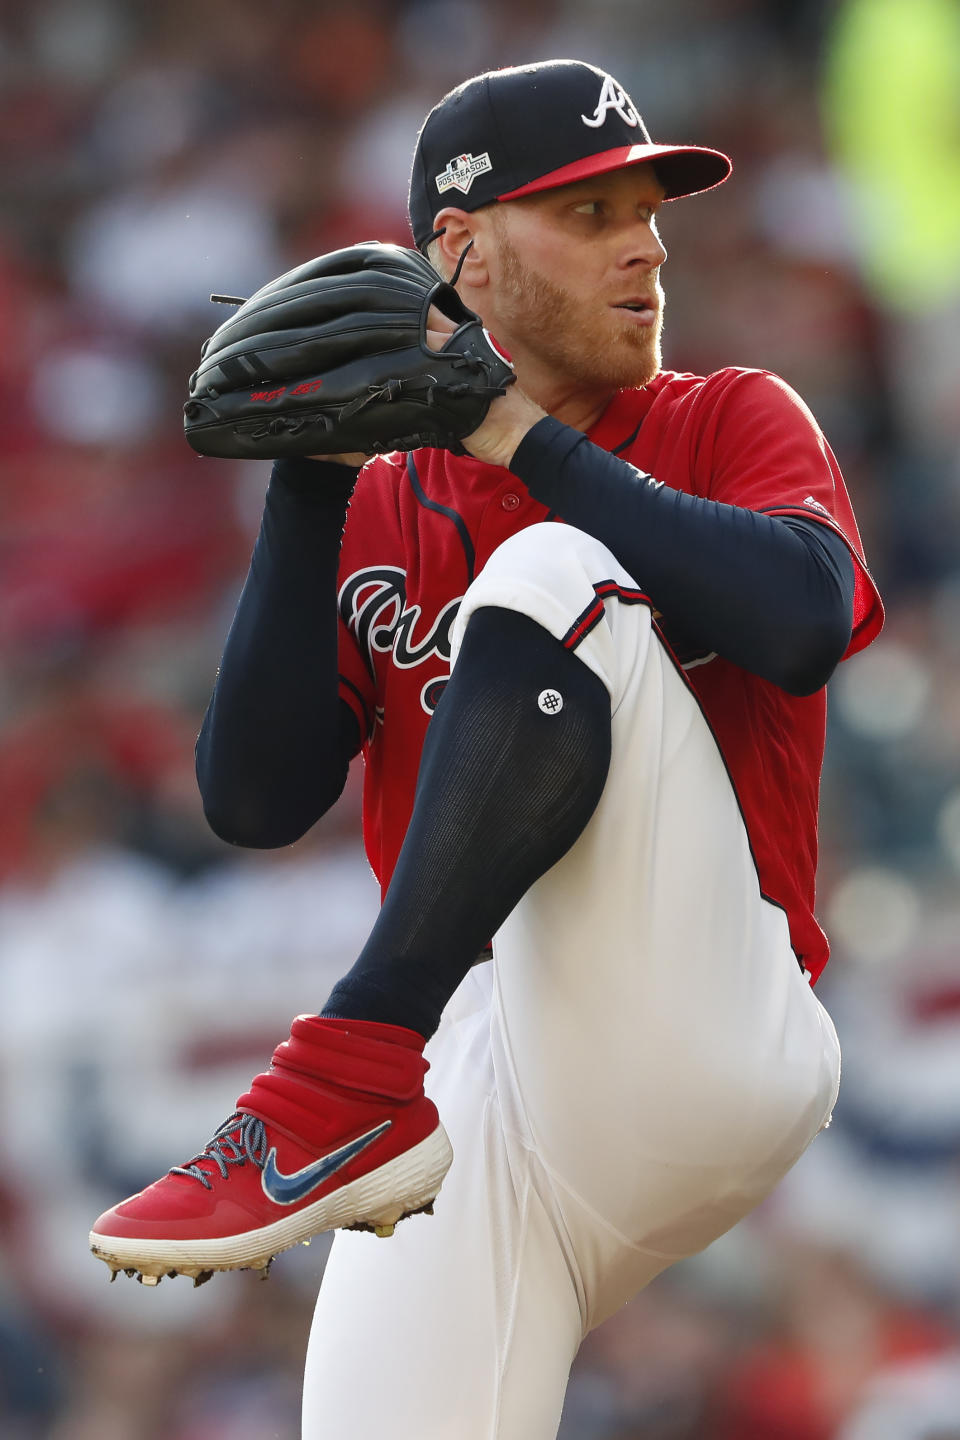 Atlanta Braves starting pitcher Mike Foltynewicz (26) works in the fifth inning during Game 2 of a best-of-five National League Division Series, Friday, Oct. 4, 2019, in Atlanta. (AP Photo/John Bazemore)